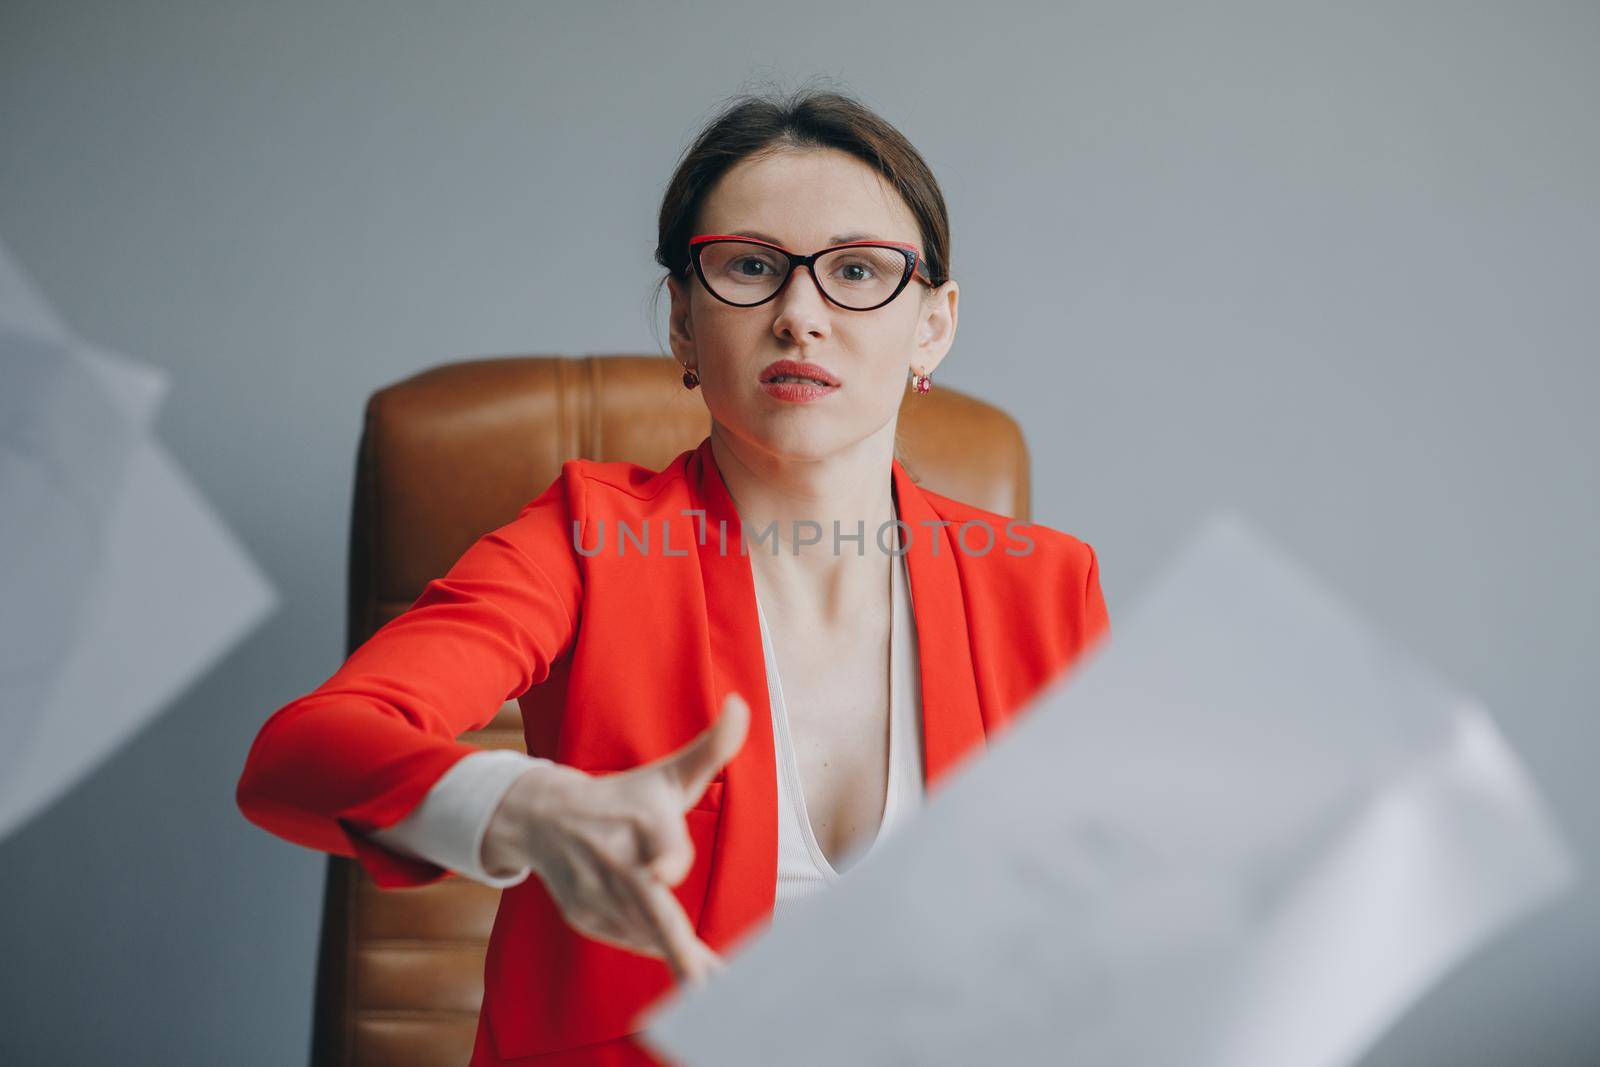 Young stressed woman sitting at desk in a little office or home mad at work, ripping documents with frustrated facial expression. Throwing around scraps of paper. Negative human emotions